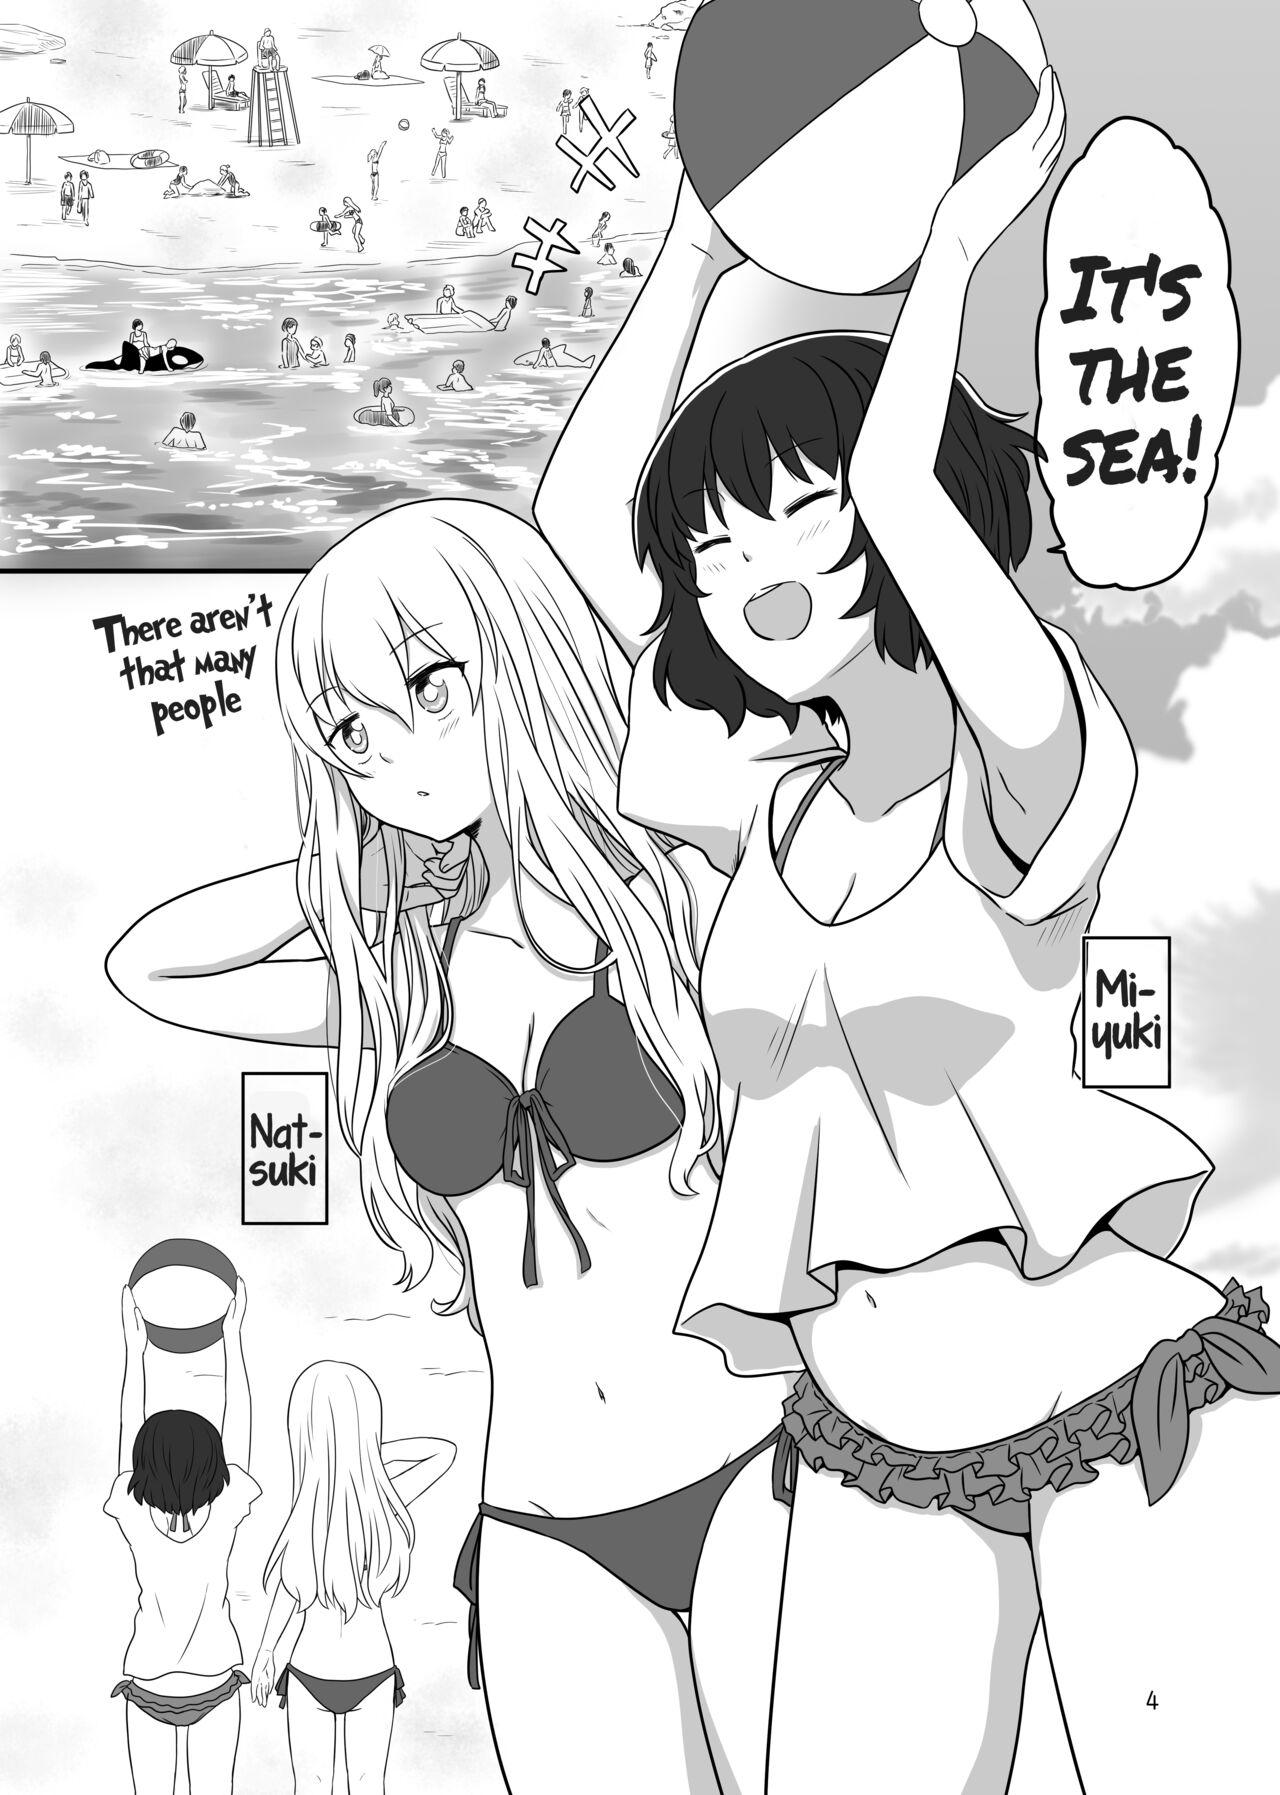 A yuri couple does exhibitionism at the beach 2